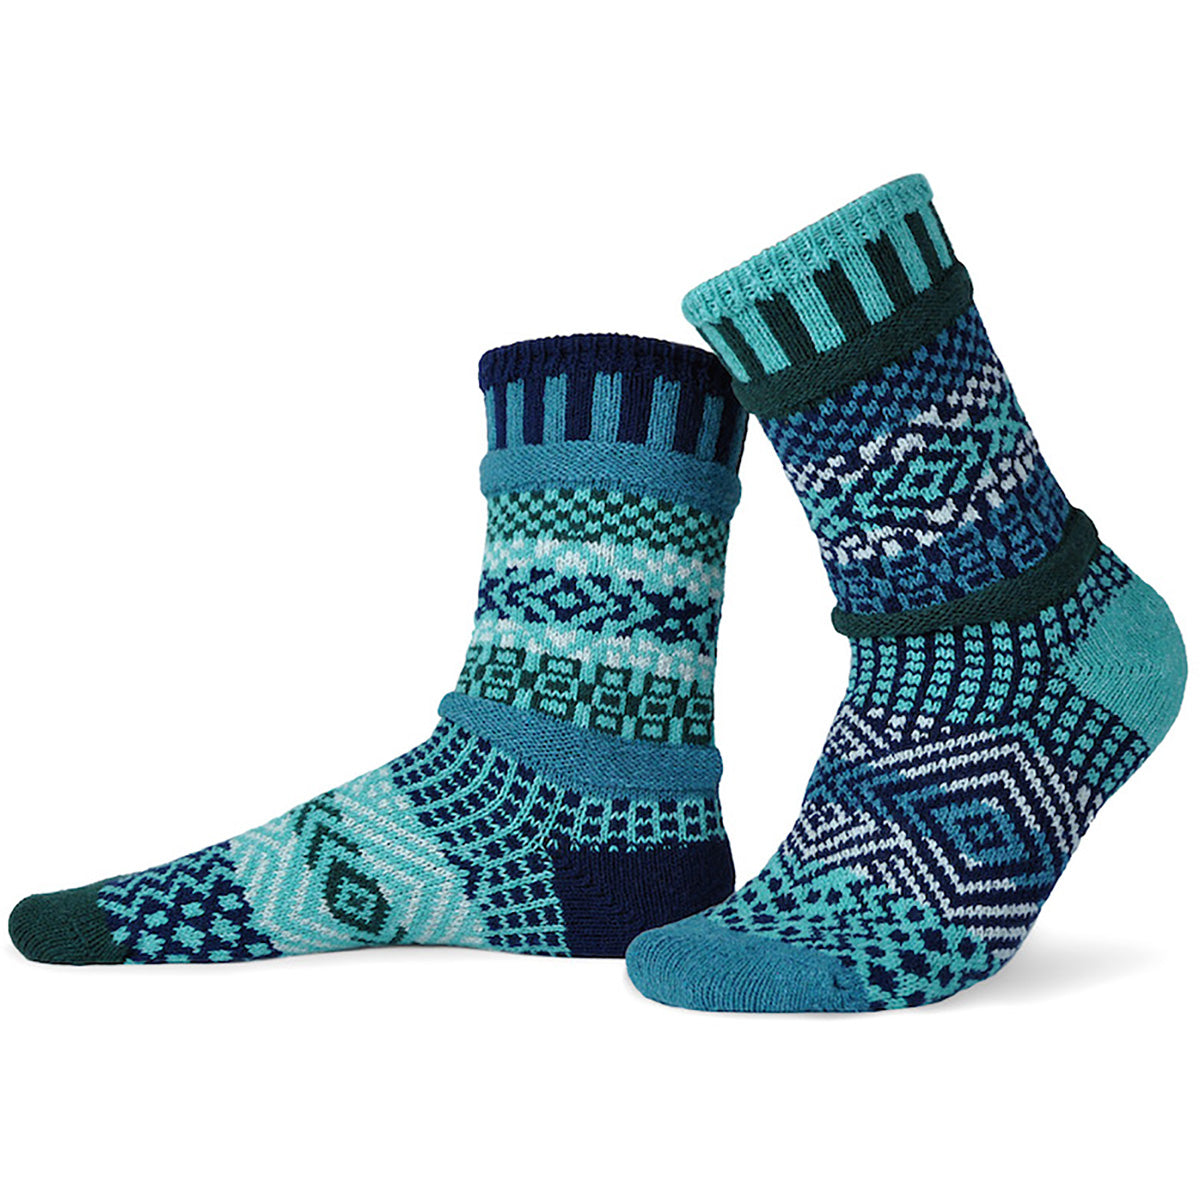 Mismatched socks from Solmate Socks in Evergreen pattern with blue and green